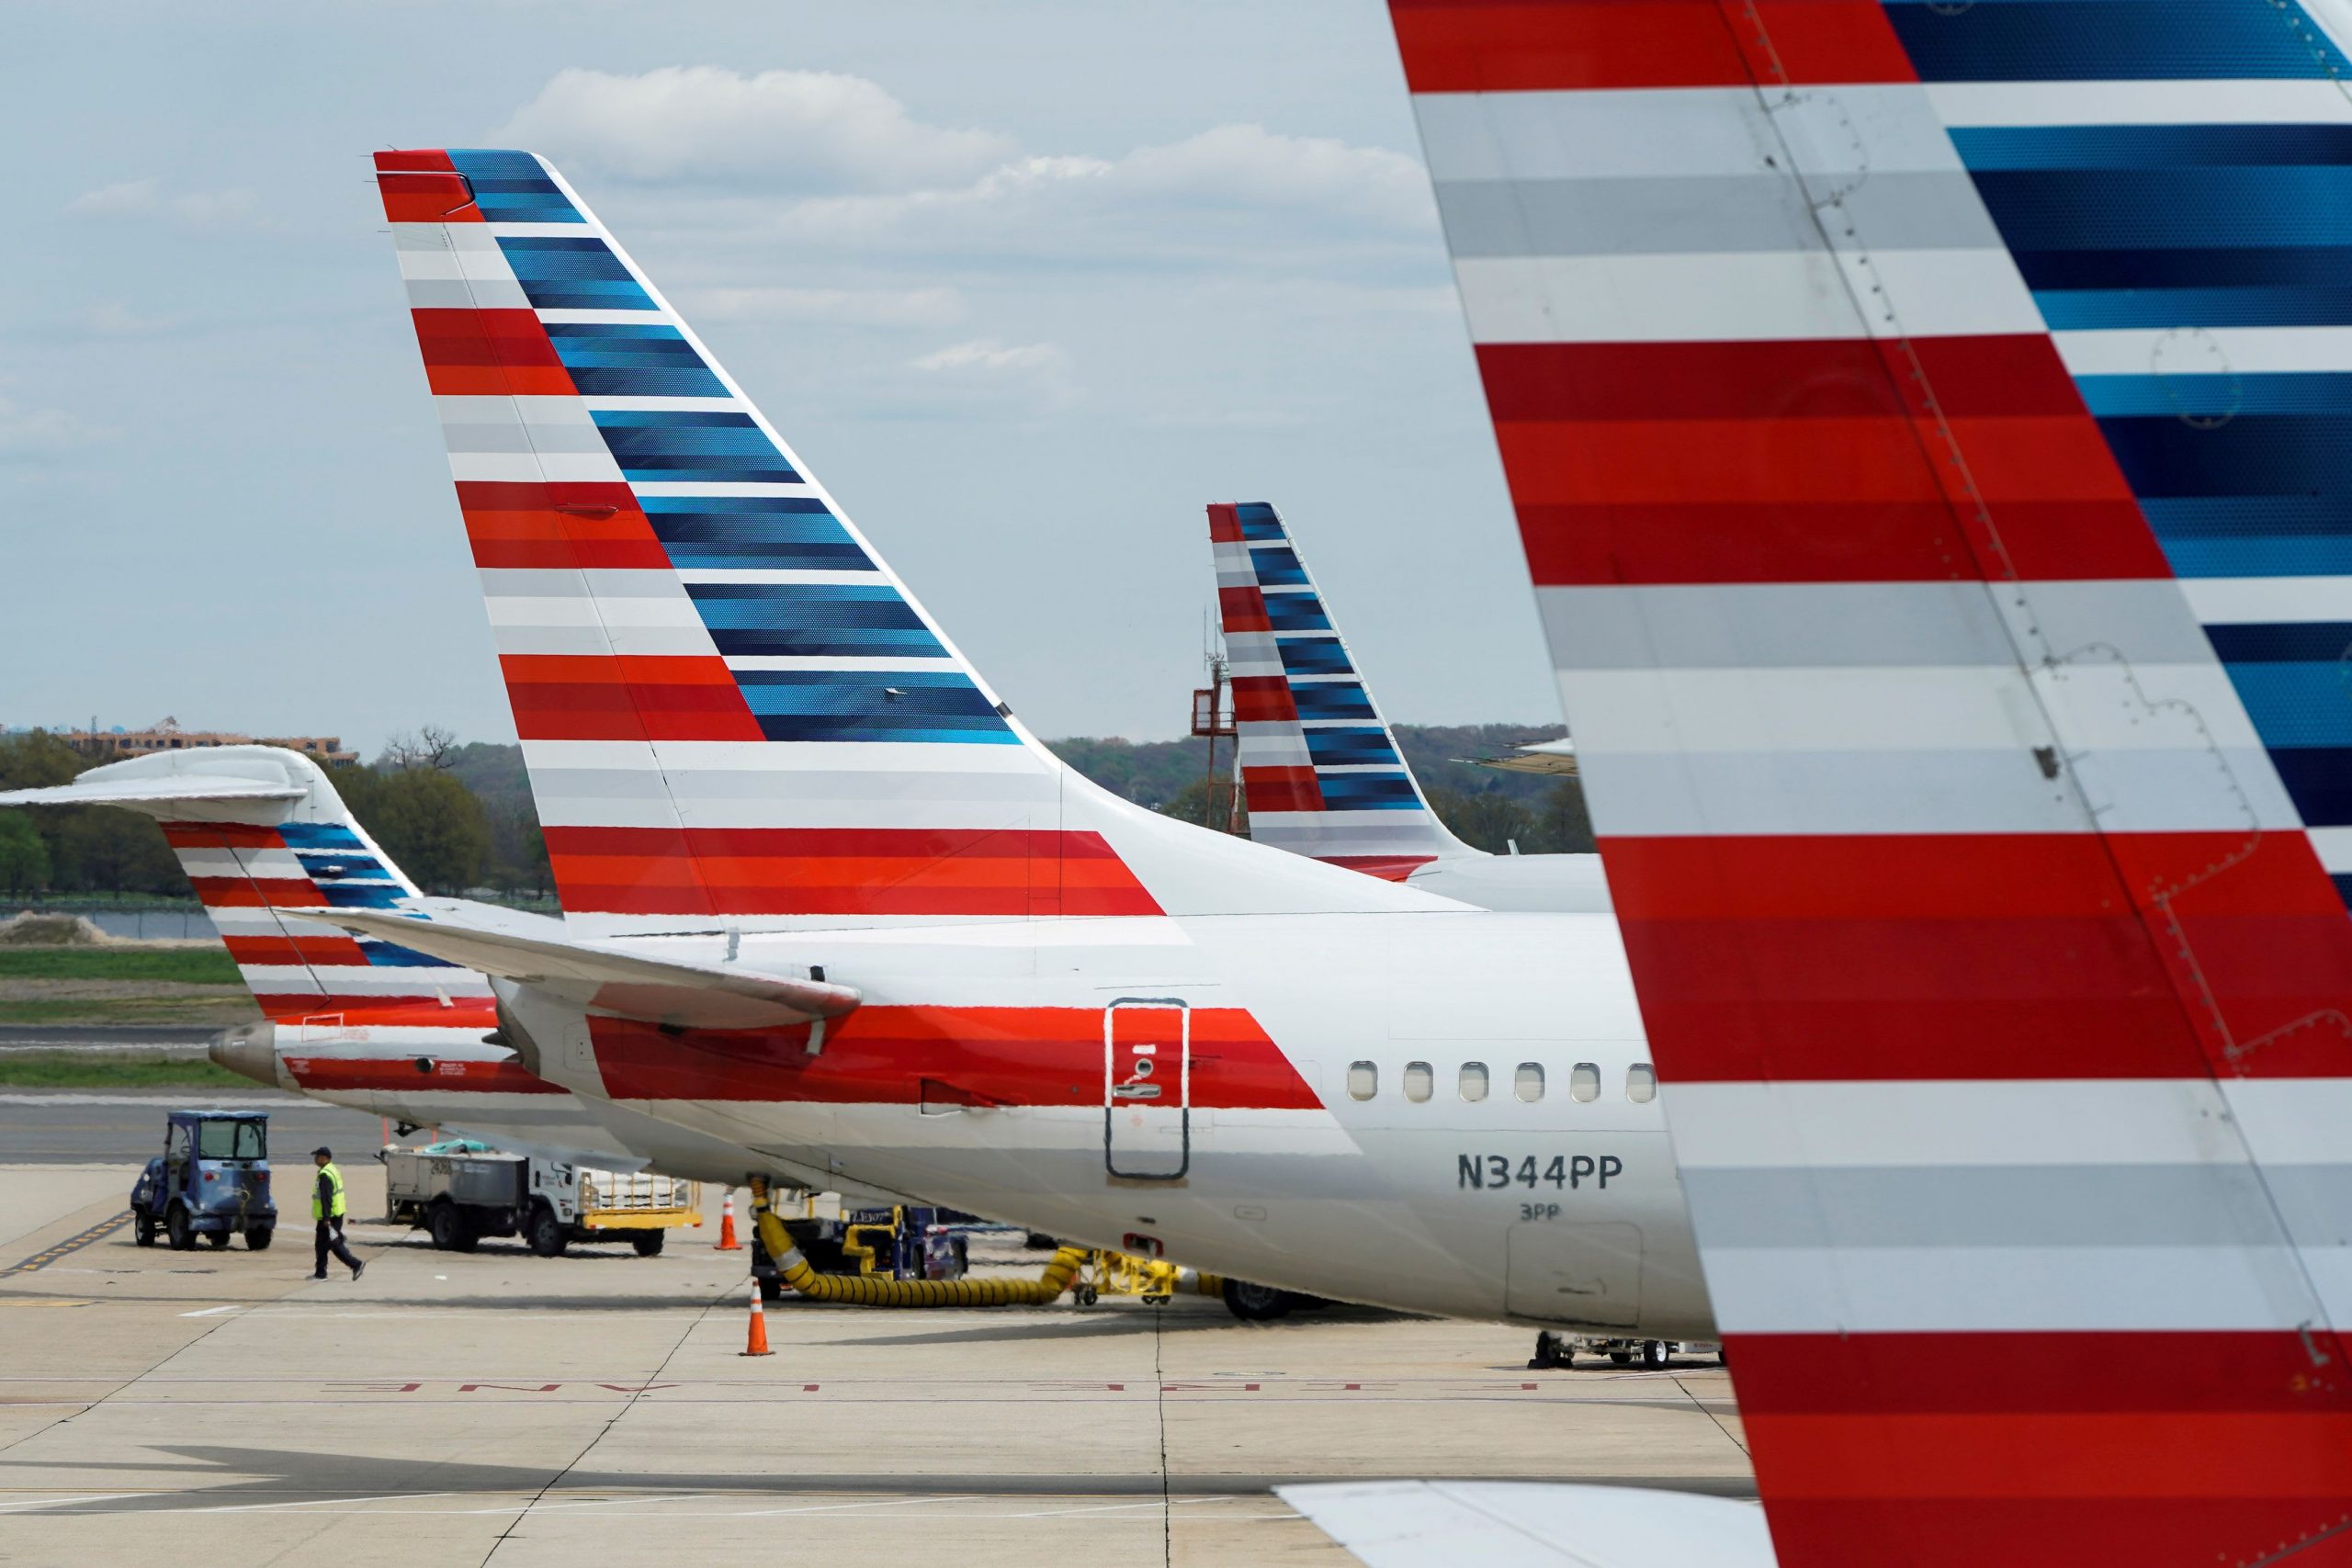 American Airlines to Furlough 19,000 Workers as Aid Program Set to Expire